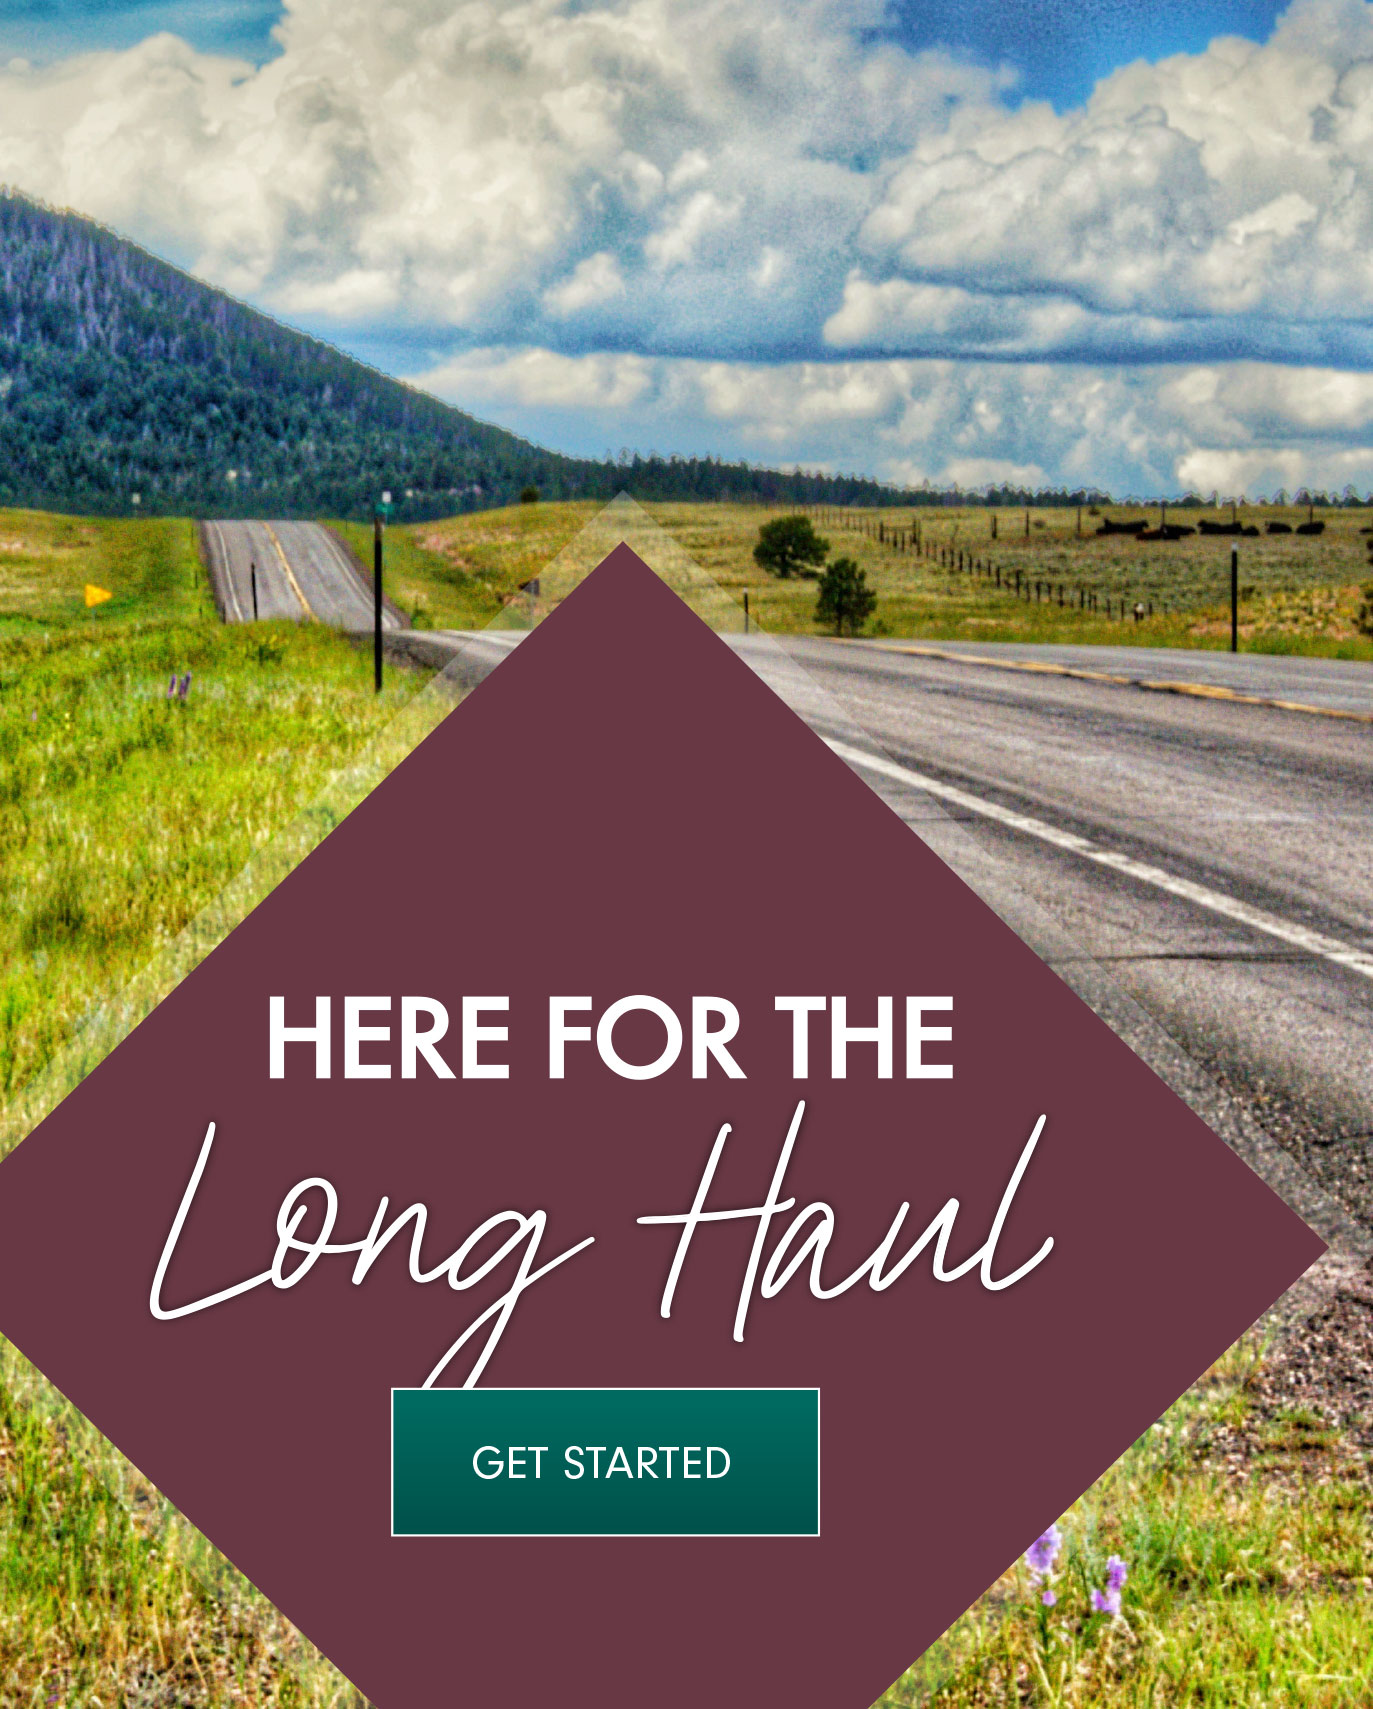 Here for the Long Haul with Get Started button over image of road in Wyoming